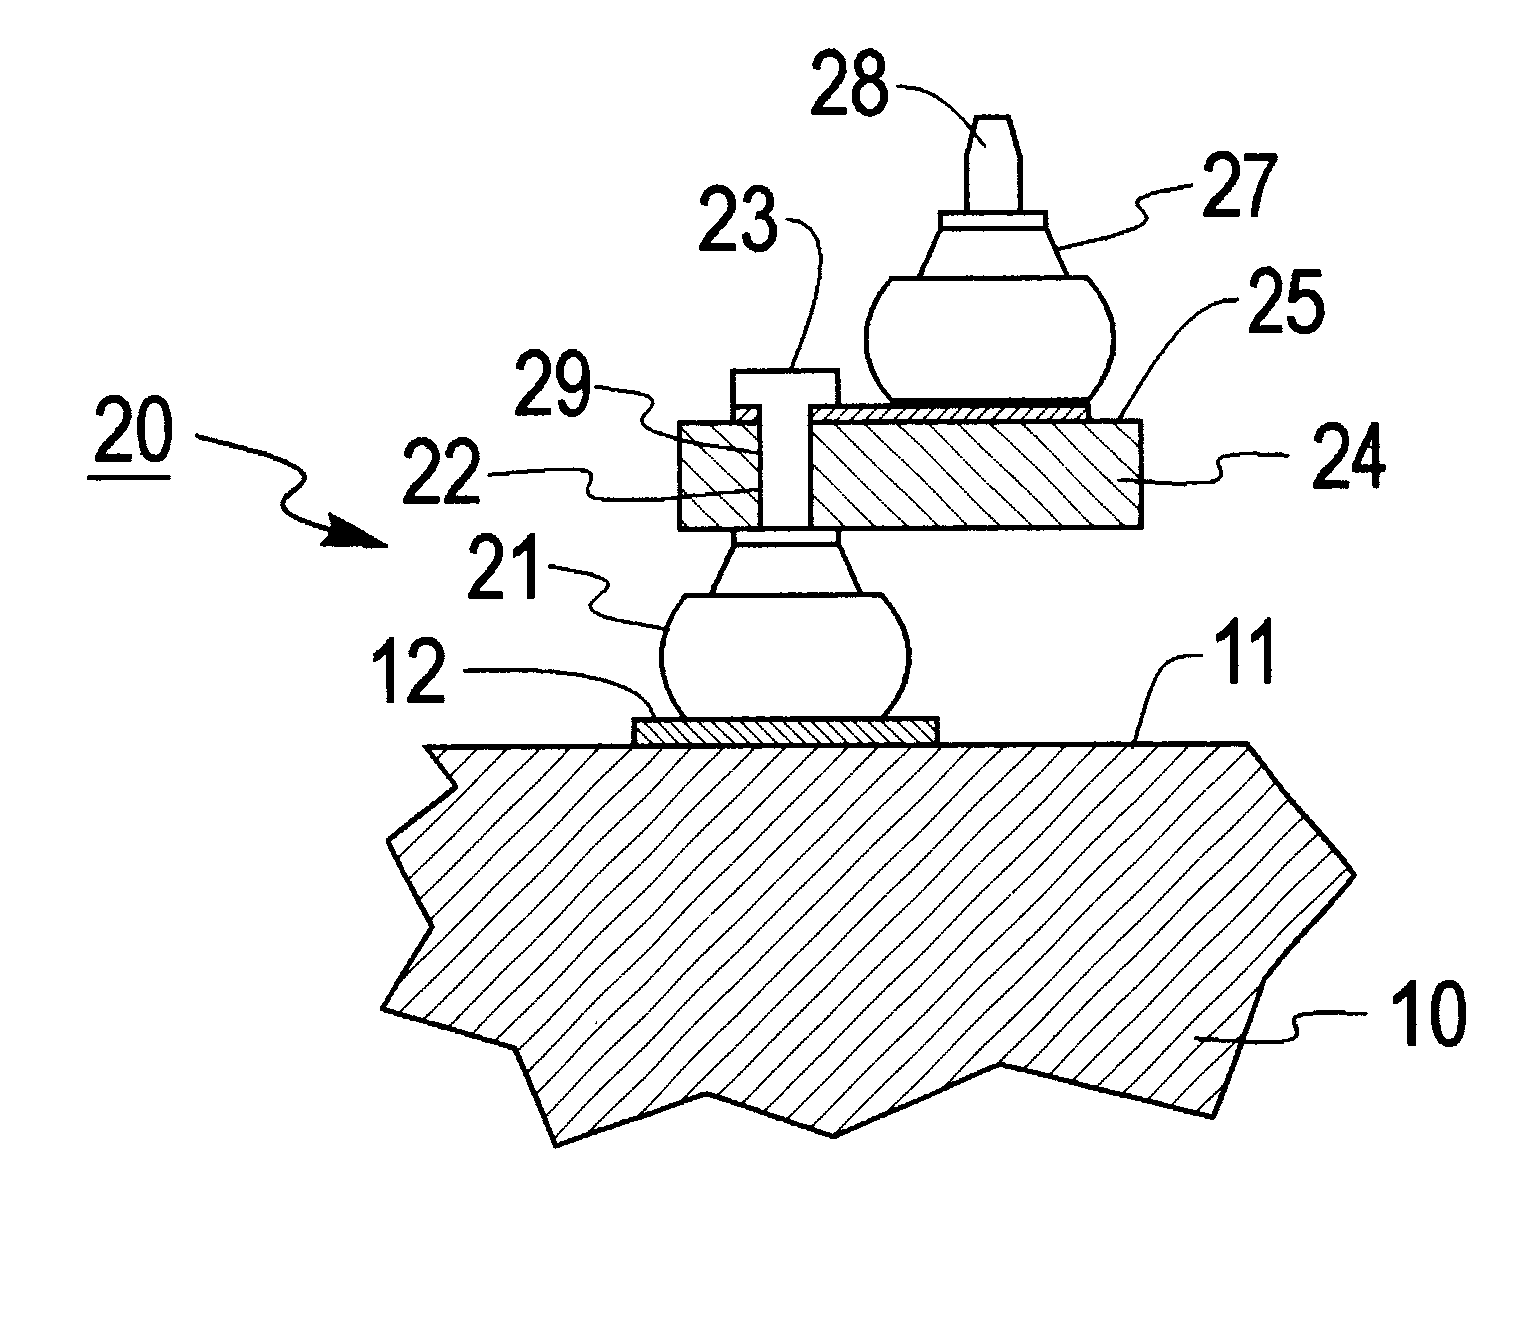 High density cantilevered probe for electronic devices